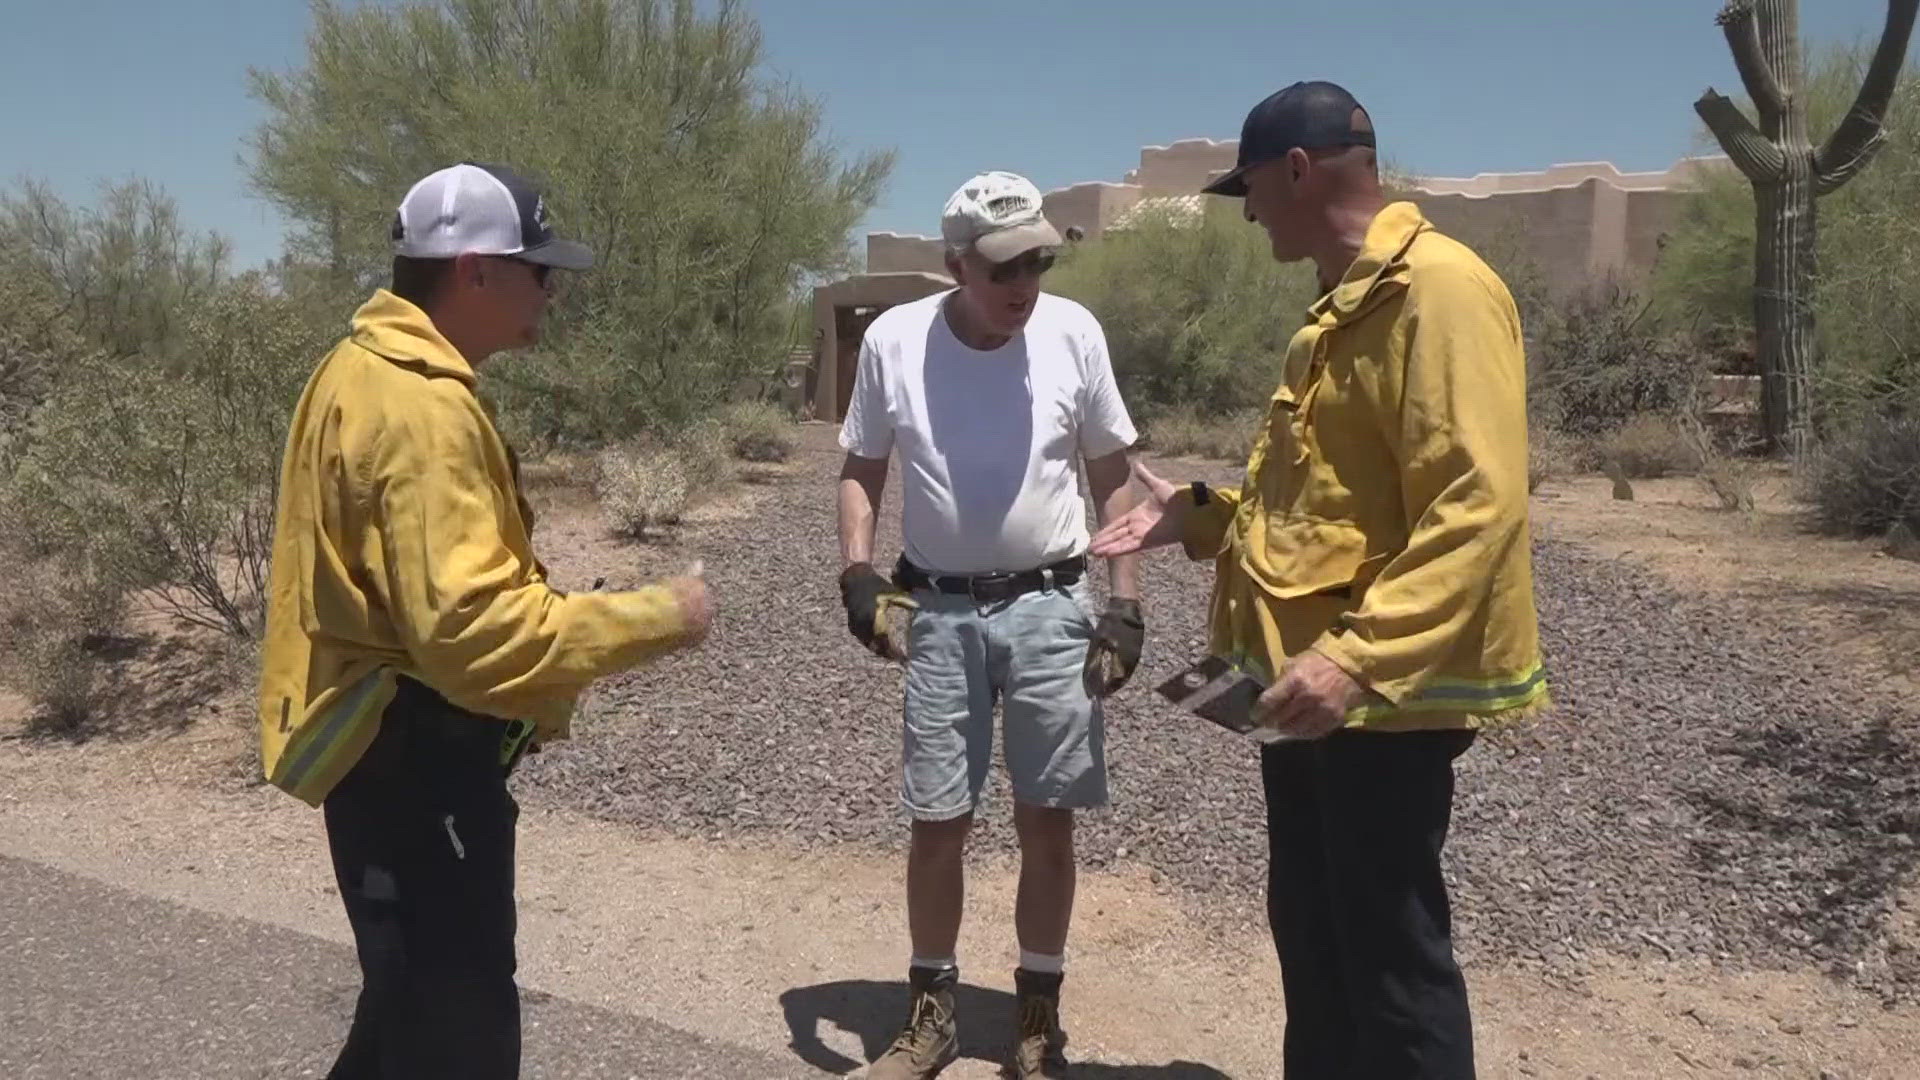 With wildfire season in full swing, firefighters from the Scottsdale Fire Department examine neighborhoods for potential home fire dangers.